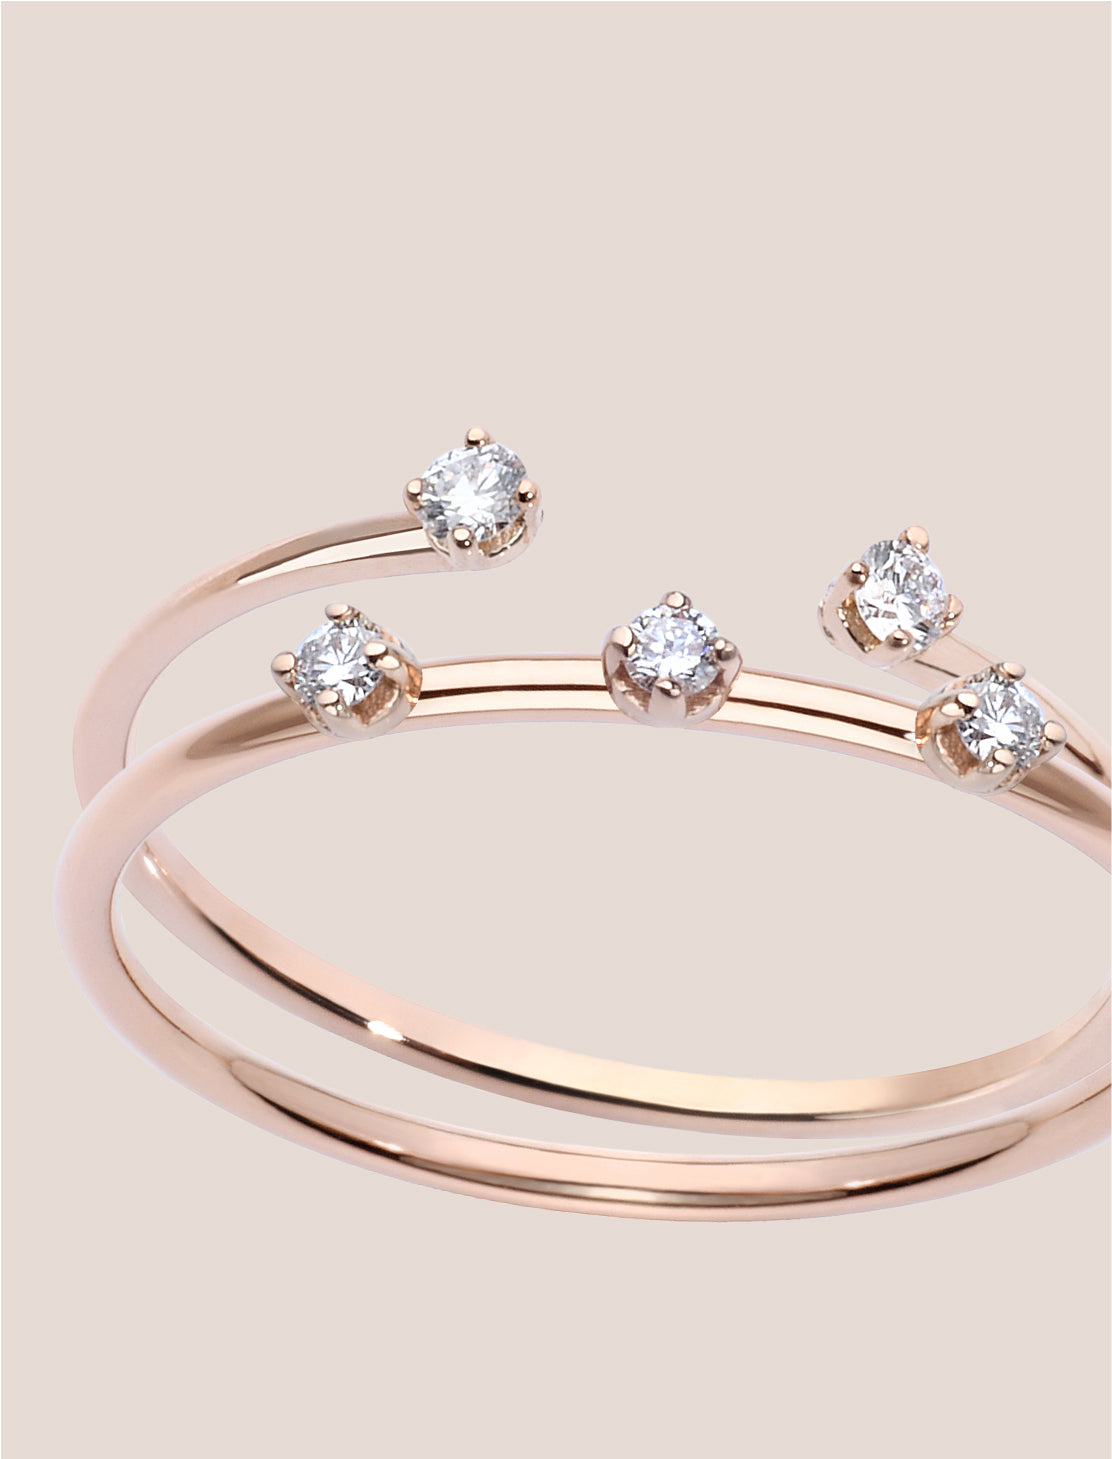 A Sign of Love: celebrate your Love in a Special Way with Gold and Diamond Jewellery